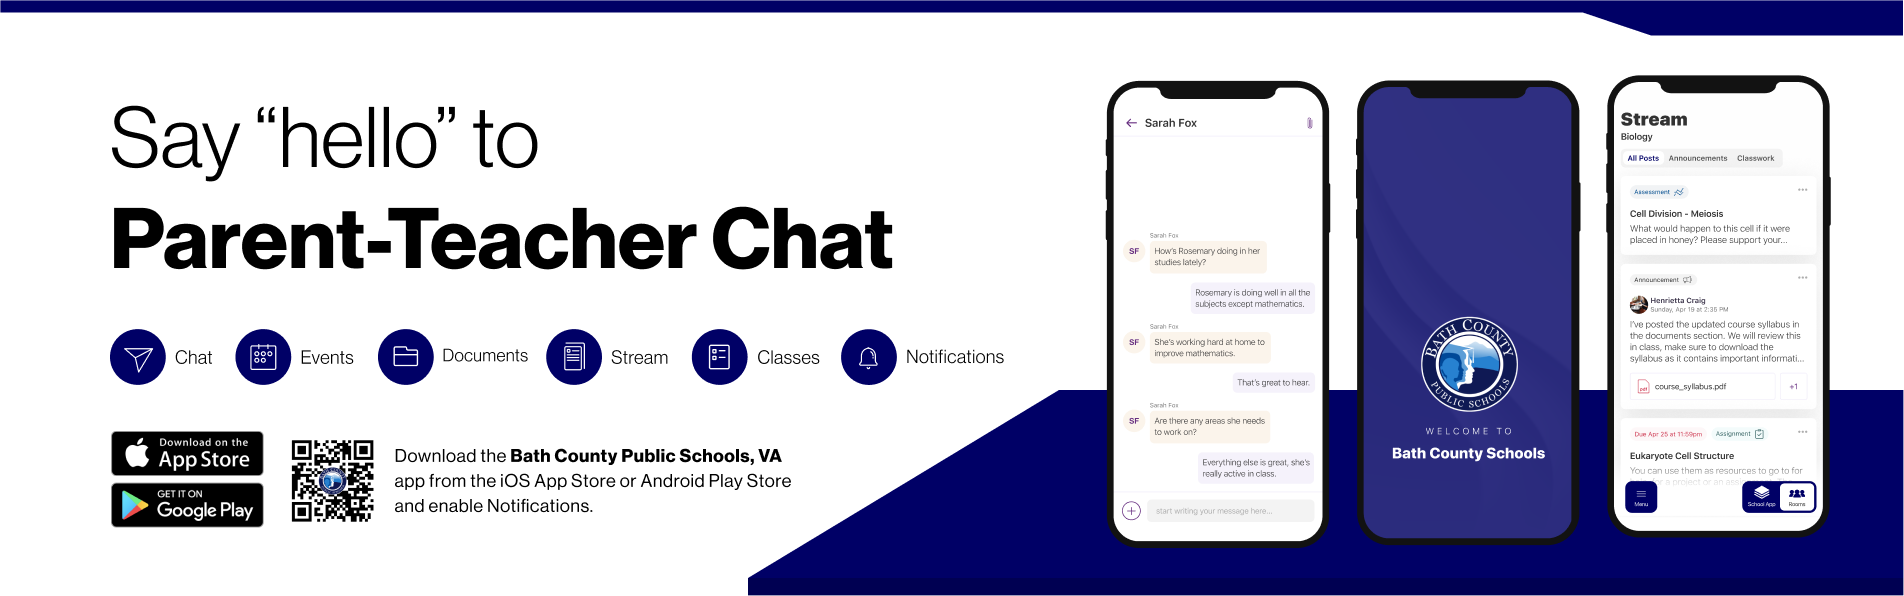 Say hello to Parent-Teacher chat in the new Rooms app. Download the Bath County Public Schools app in the Google Play or Apple App store.